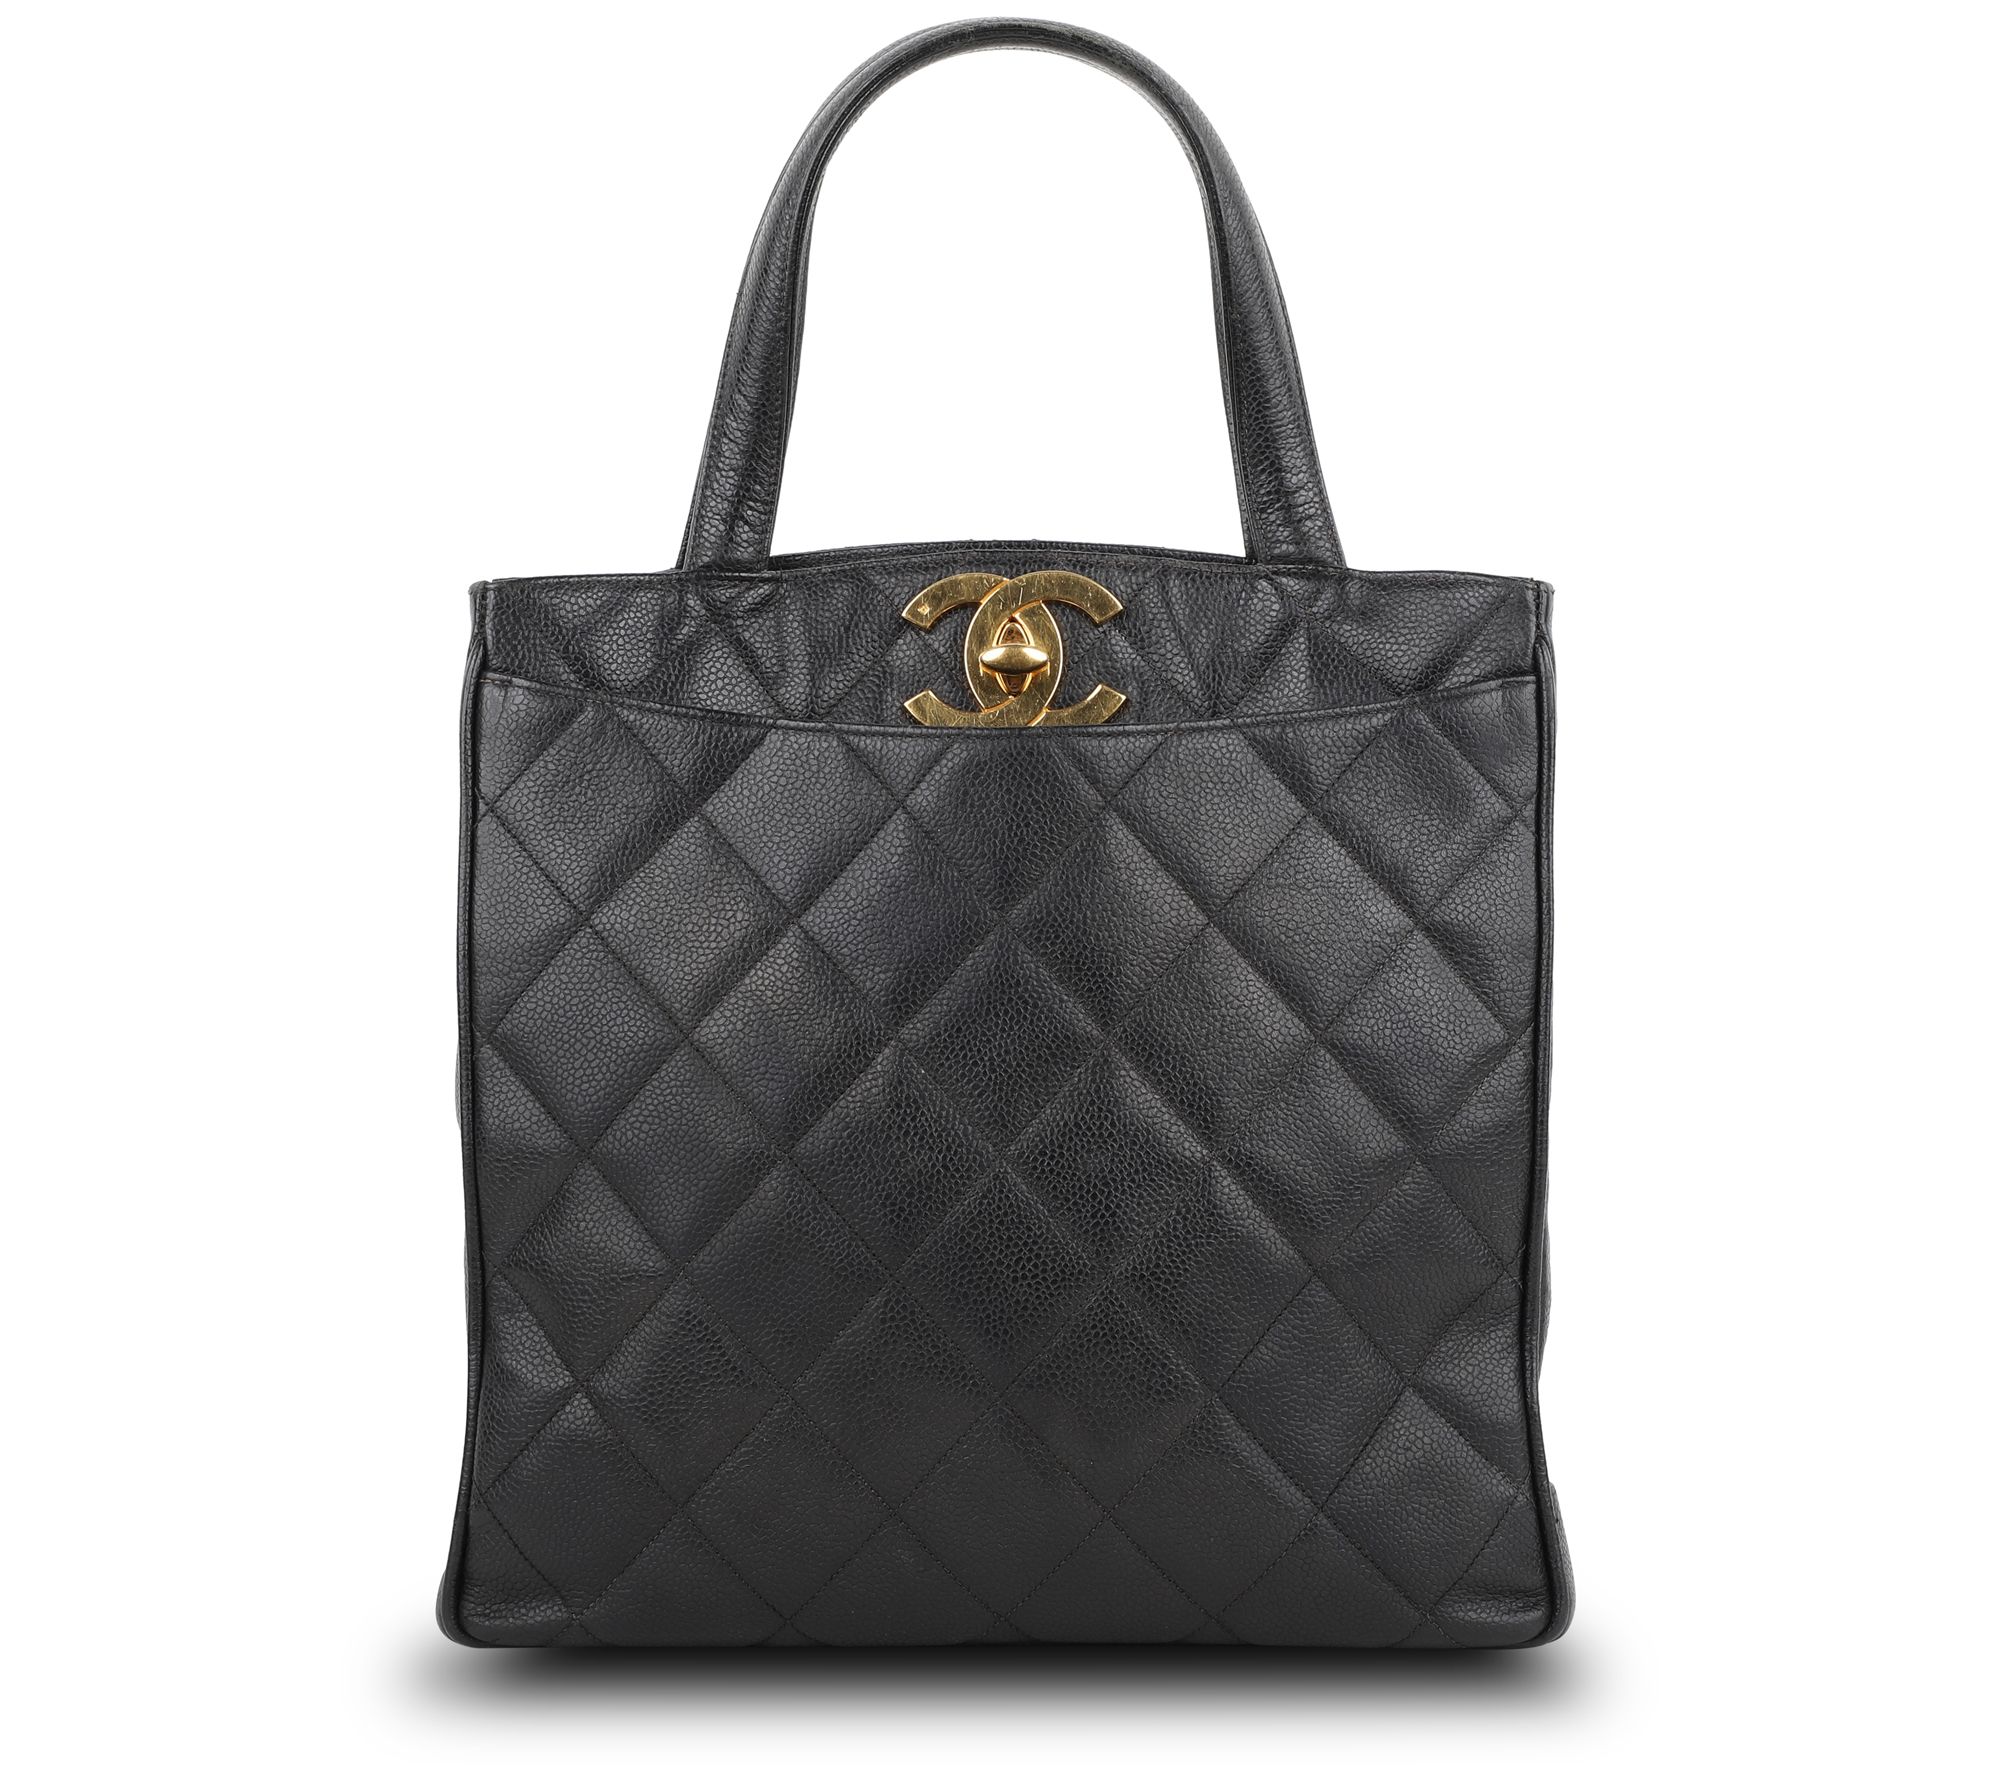 chanel large leather tote